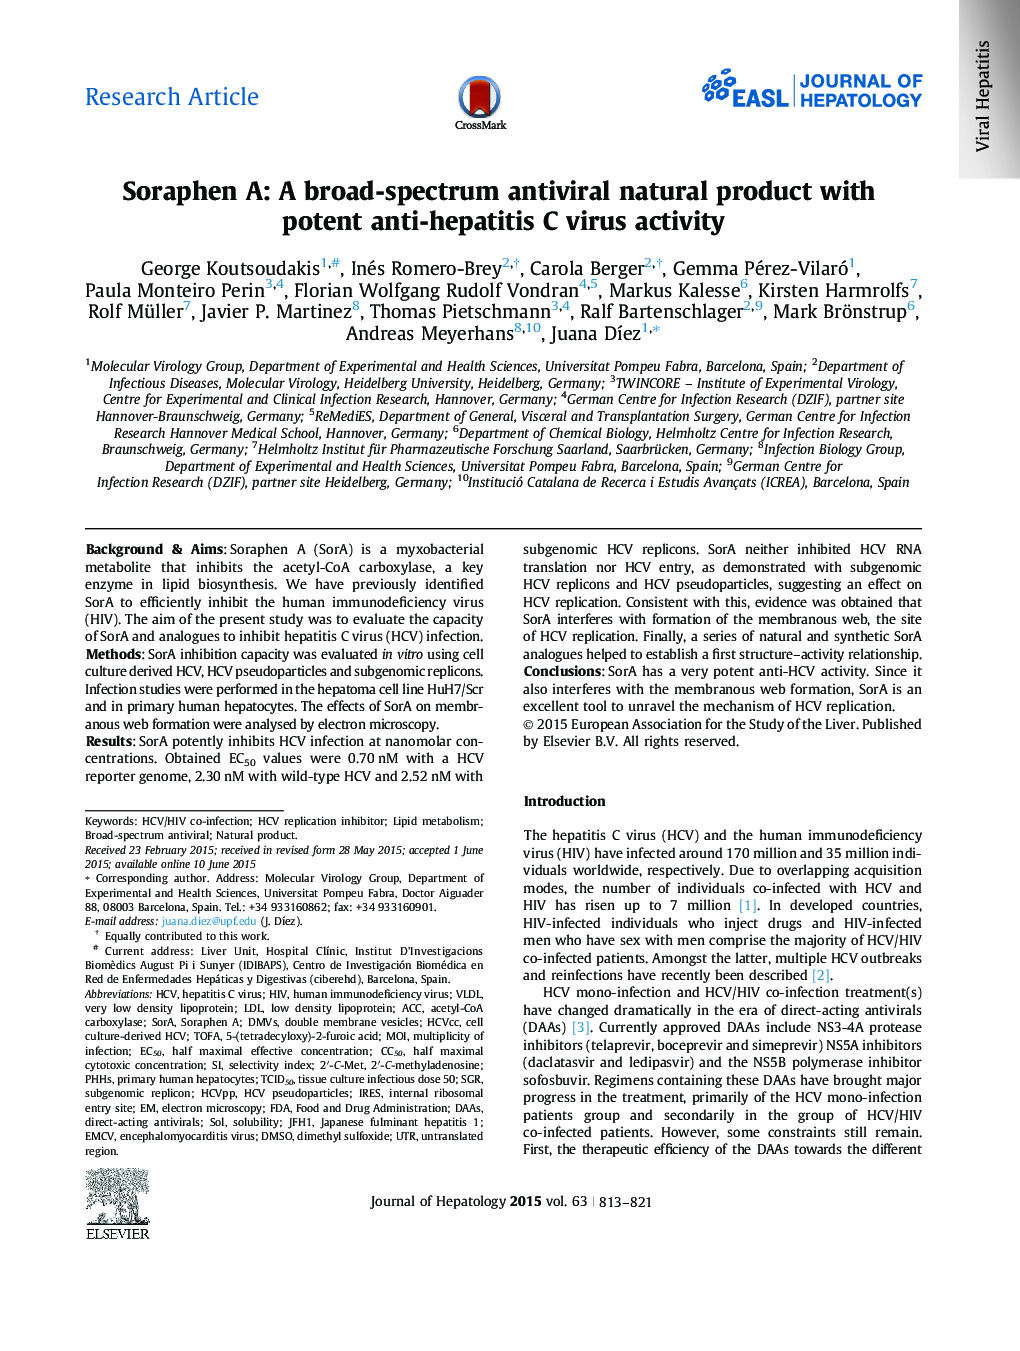 Research ArticleSoraphen A: A broad-spectrum antiviral natural product with potent anti-hepatitis C virus activity